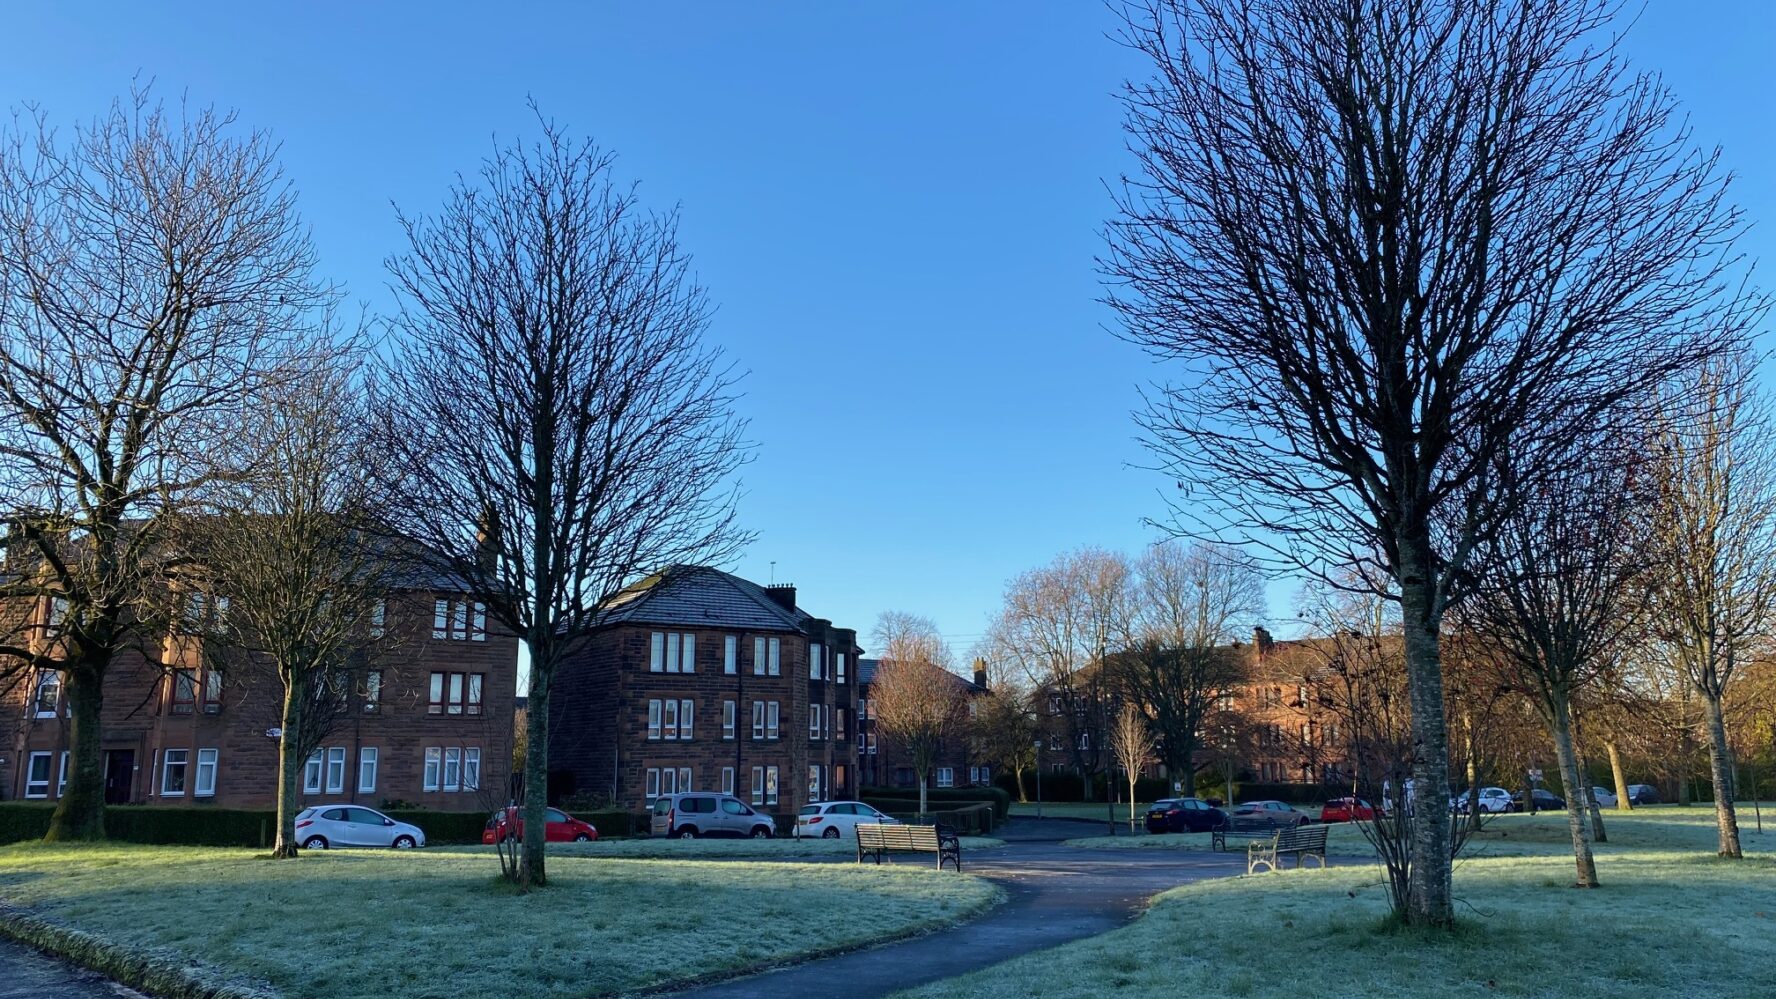 Frost on an area of grass and trees, with houses and blue sky in the background